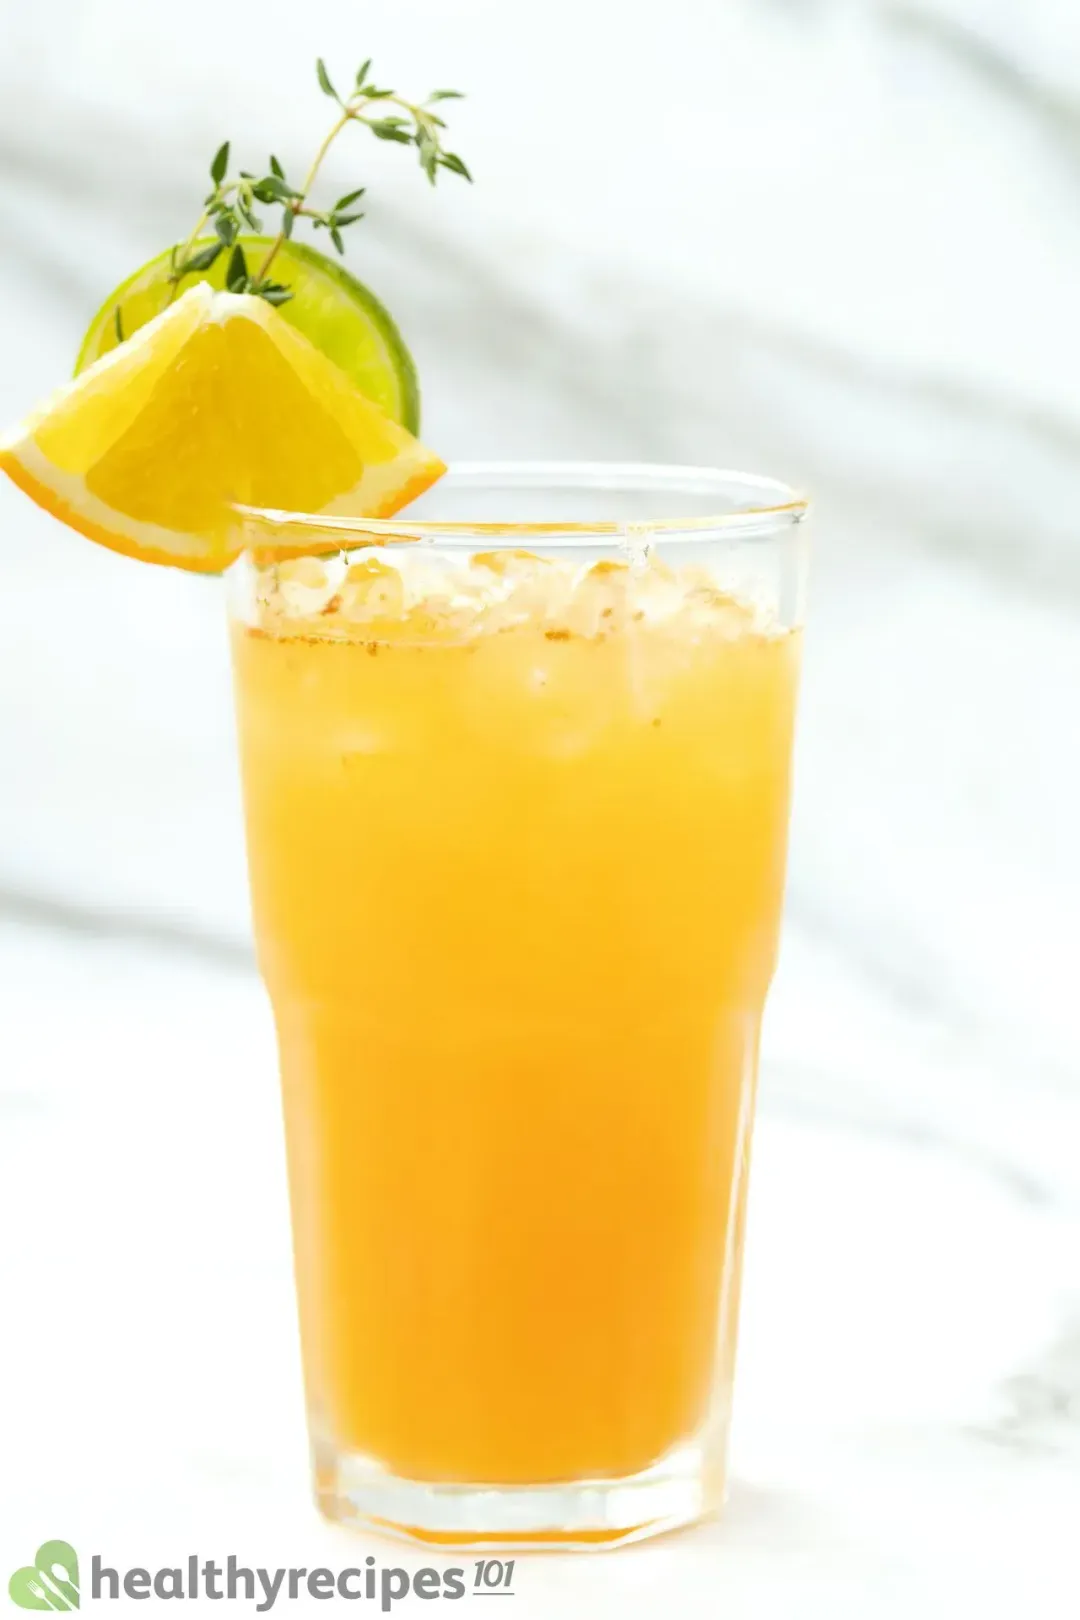 A tall glass of iced orange juice cocktail with lemon wedge and lime wheel on the rim